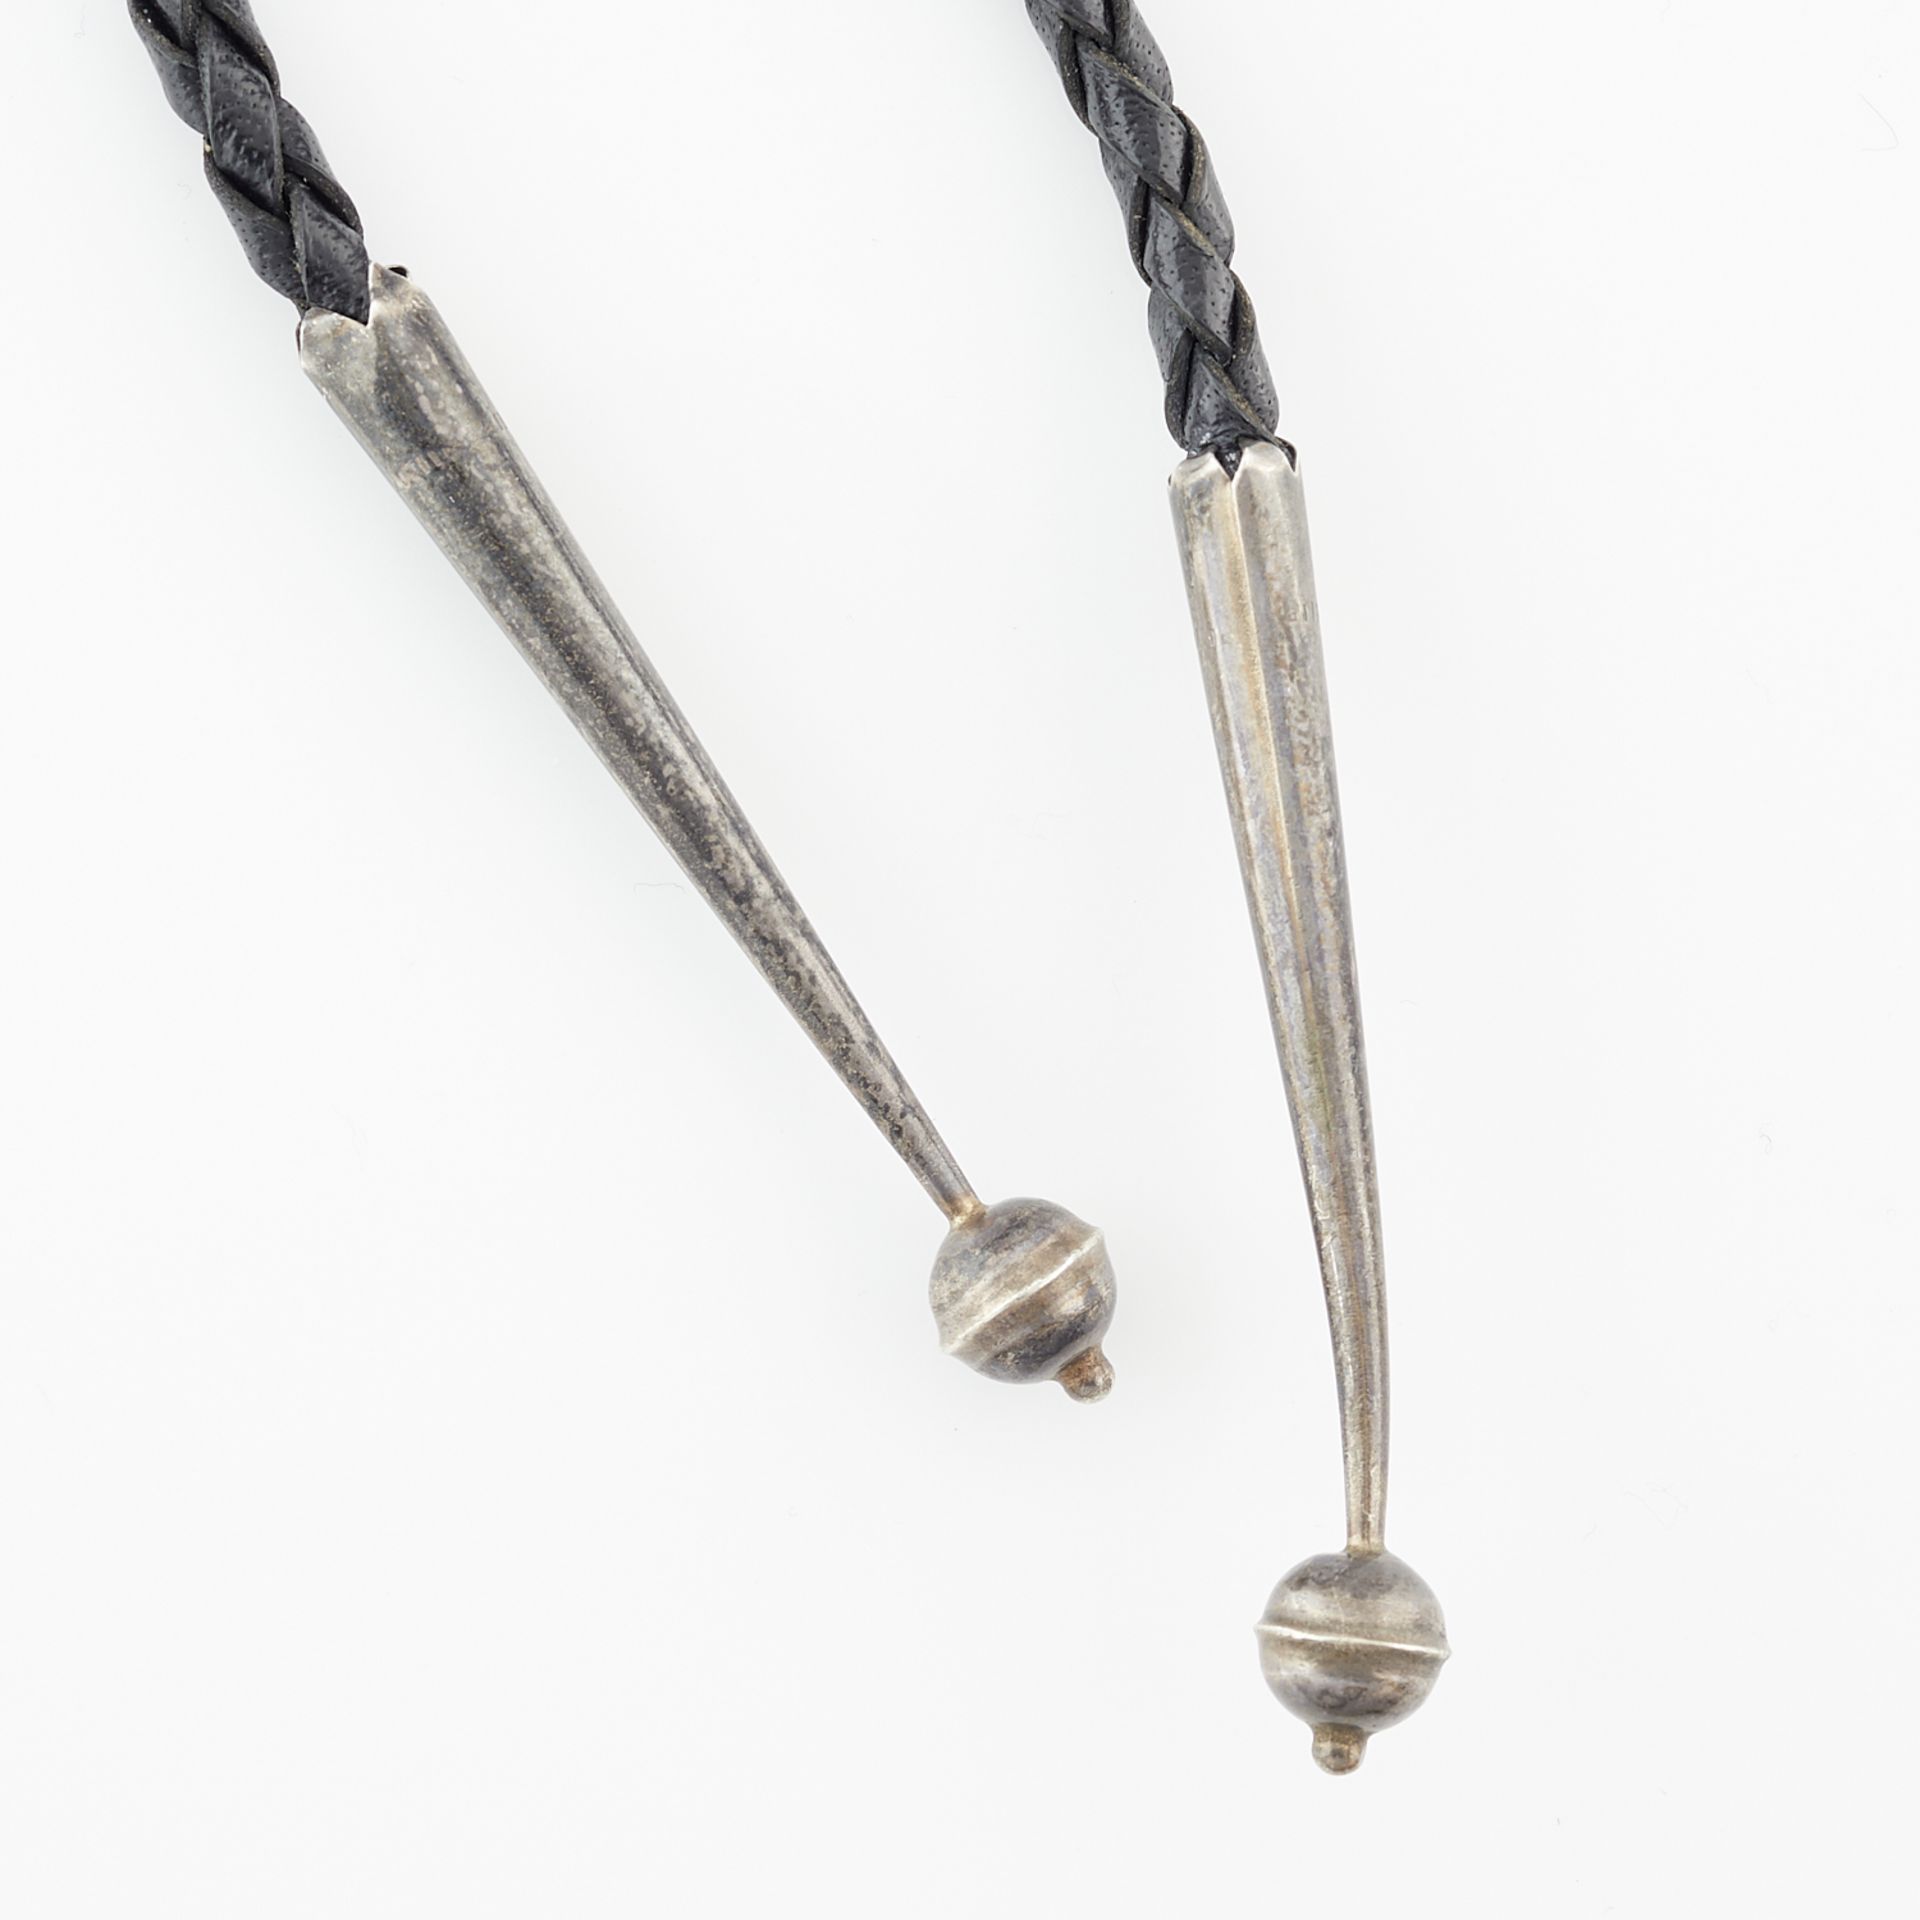 2 Southwest Bolo Ties - Image 11 of 13